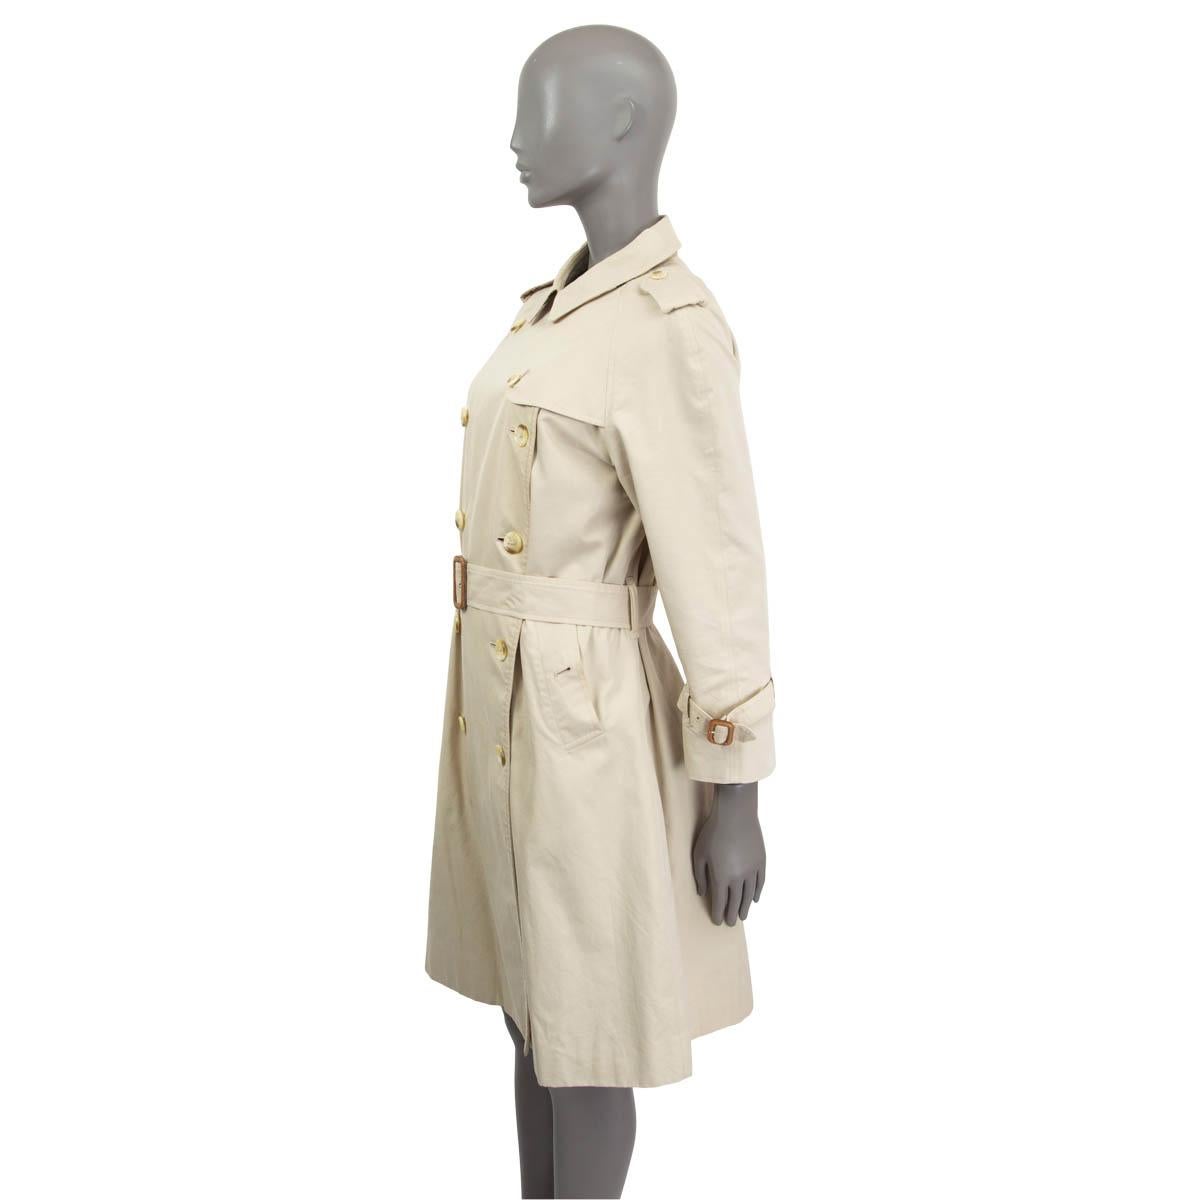 BURBERRY beige Baumwolle DOUBLE BREASTED BELTED TRENCH Mantel Jacke S - M Damen im Angebot